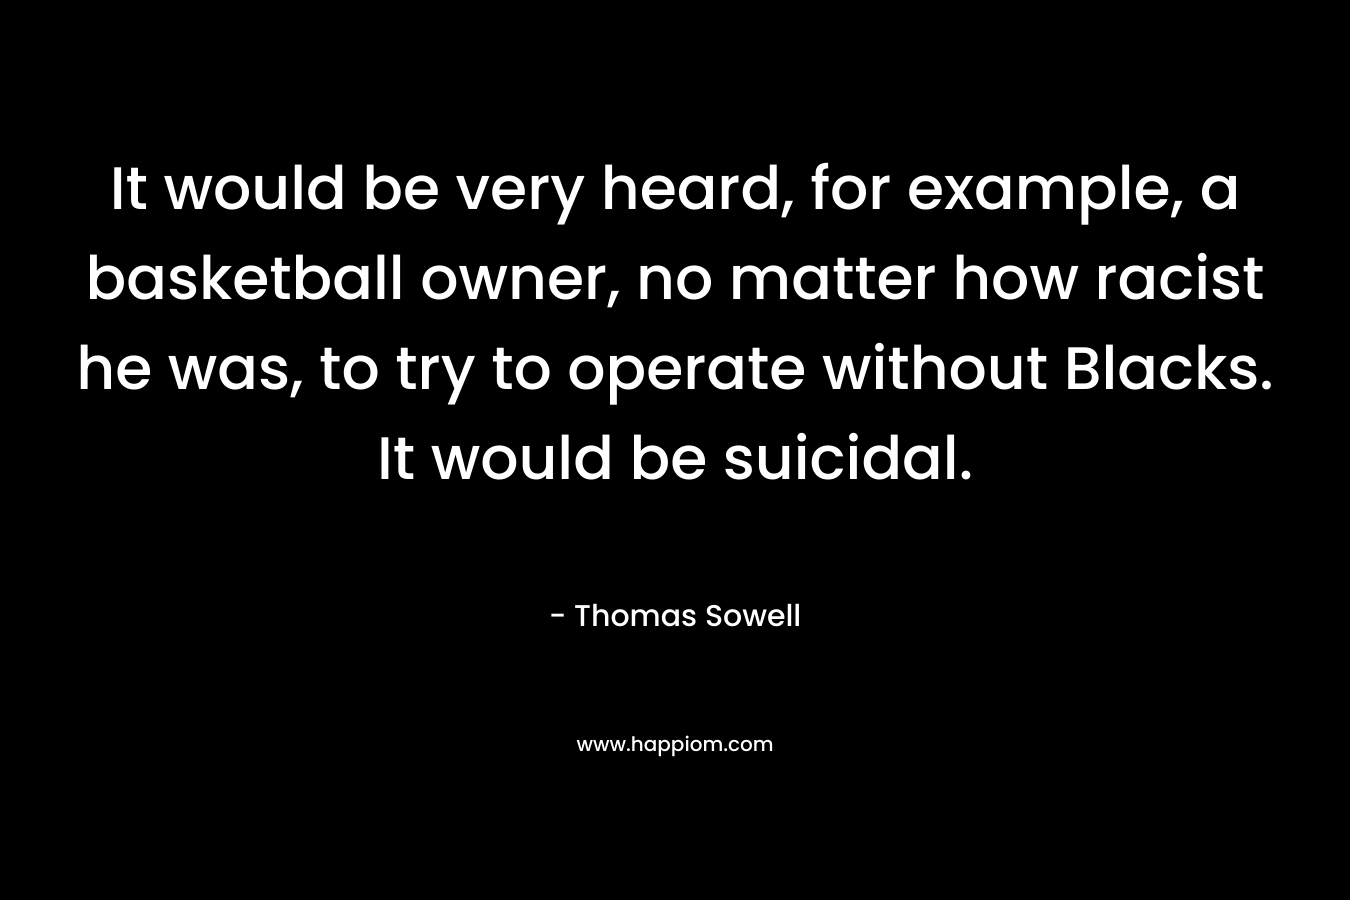 It would be very heard, for example, a basketball owner, no matter how racist he was, to try to operate without Blacks. It would be suicidal. – Thomas Sowell